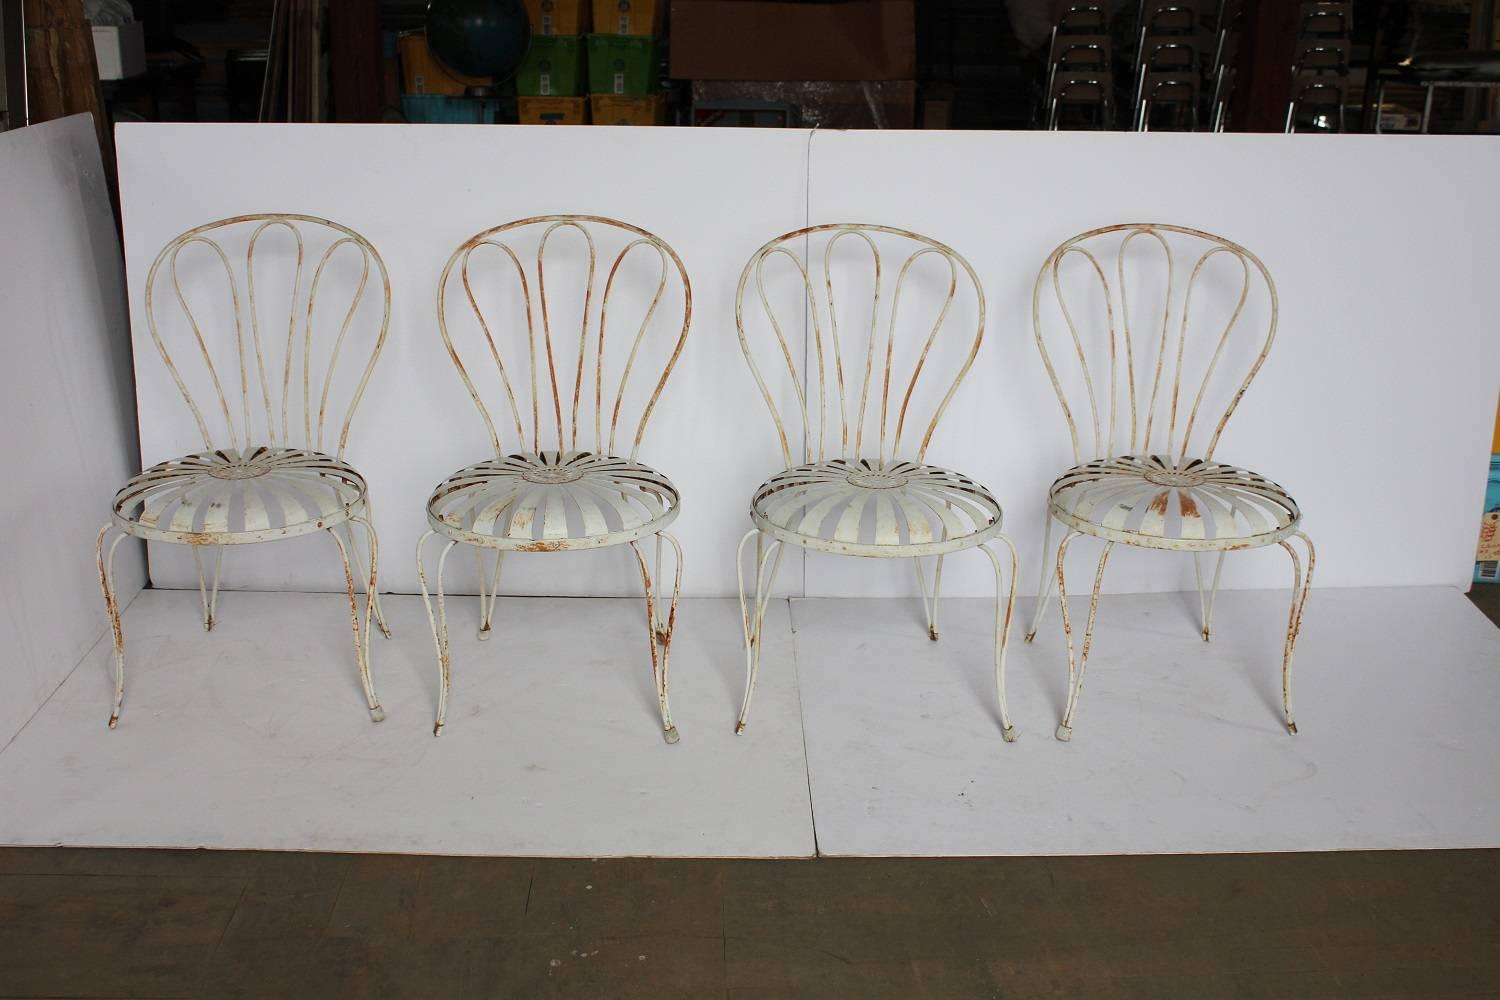 1930s French sunburst garden chairs By Francois Carre.